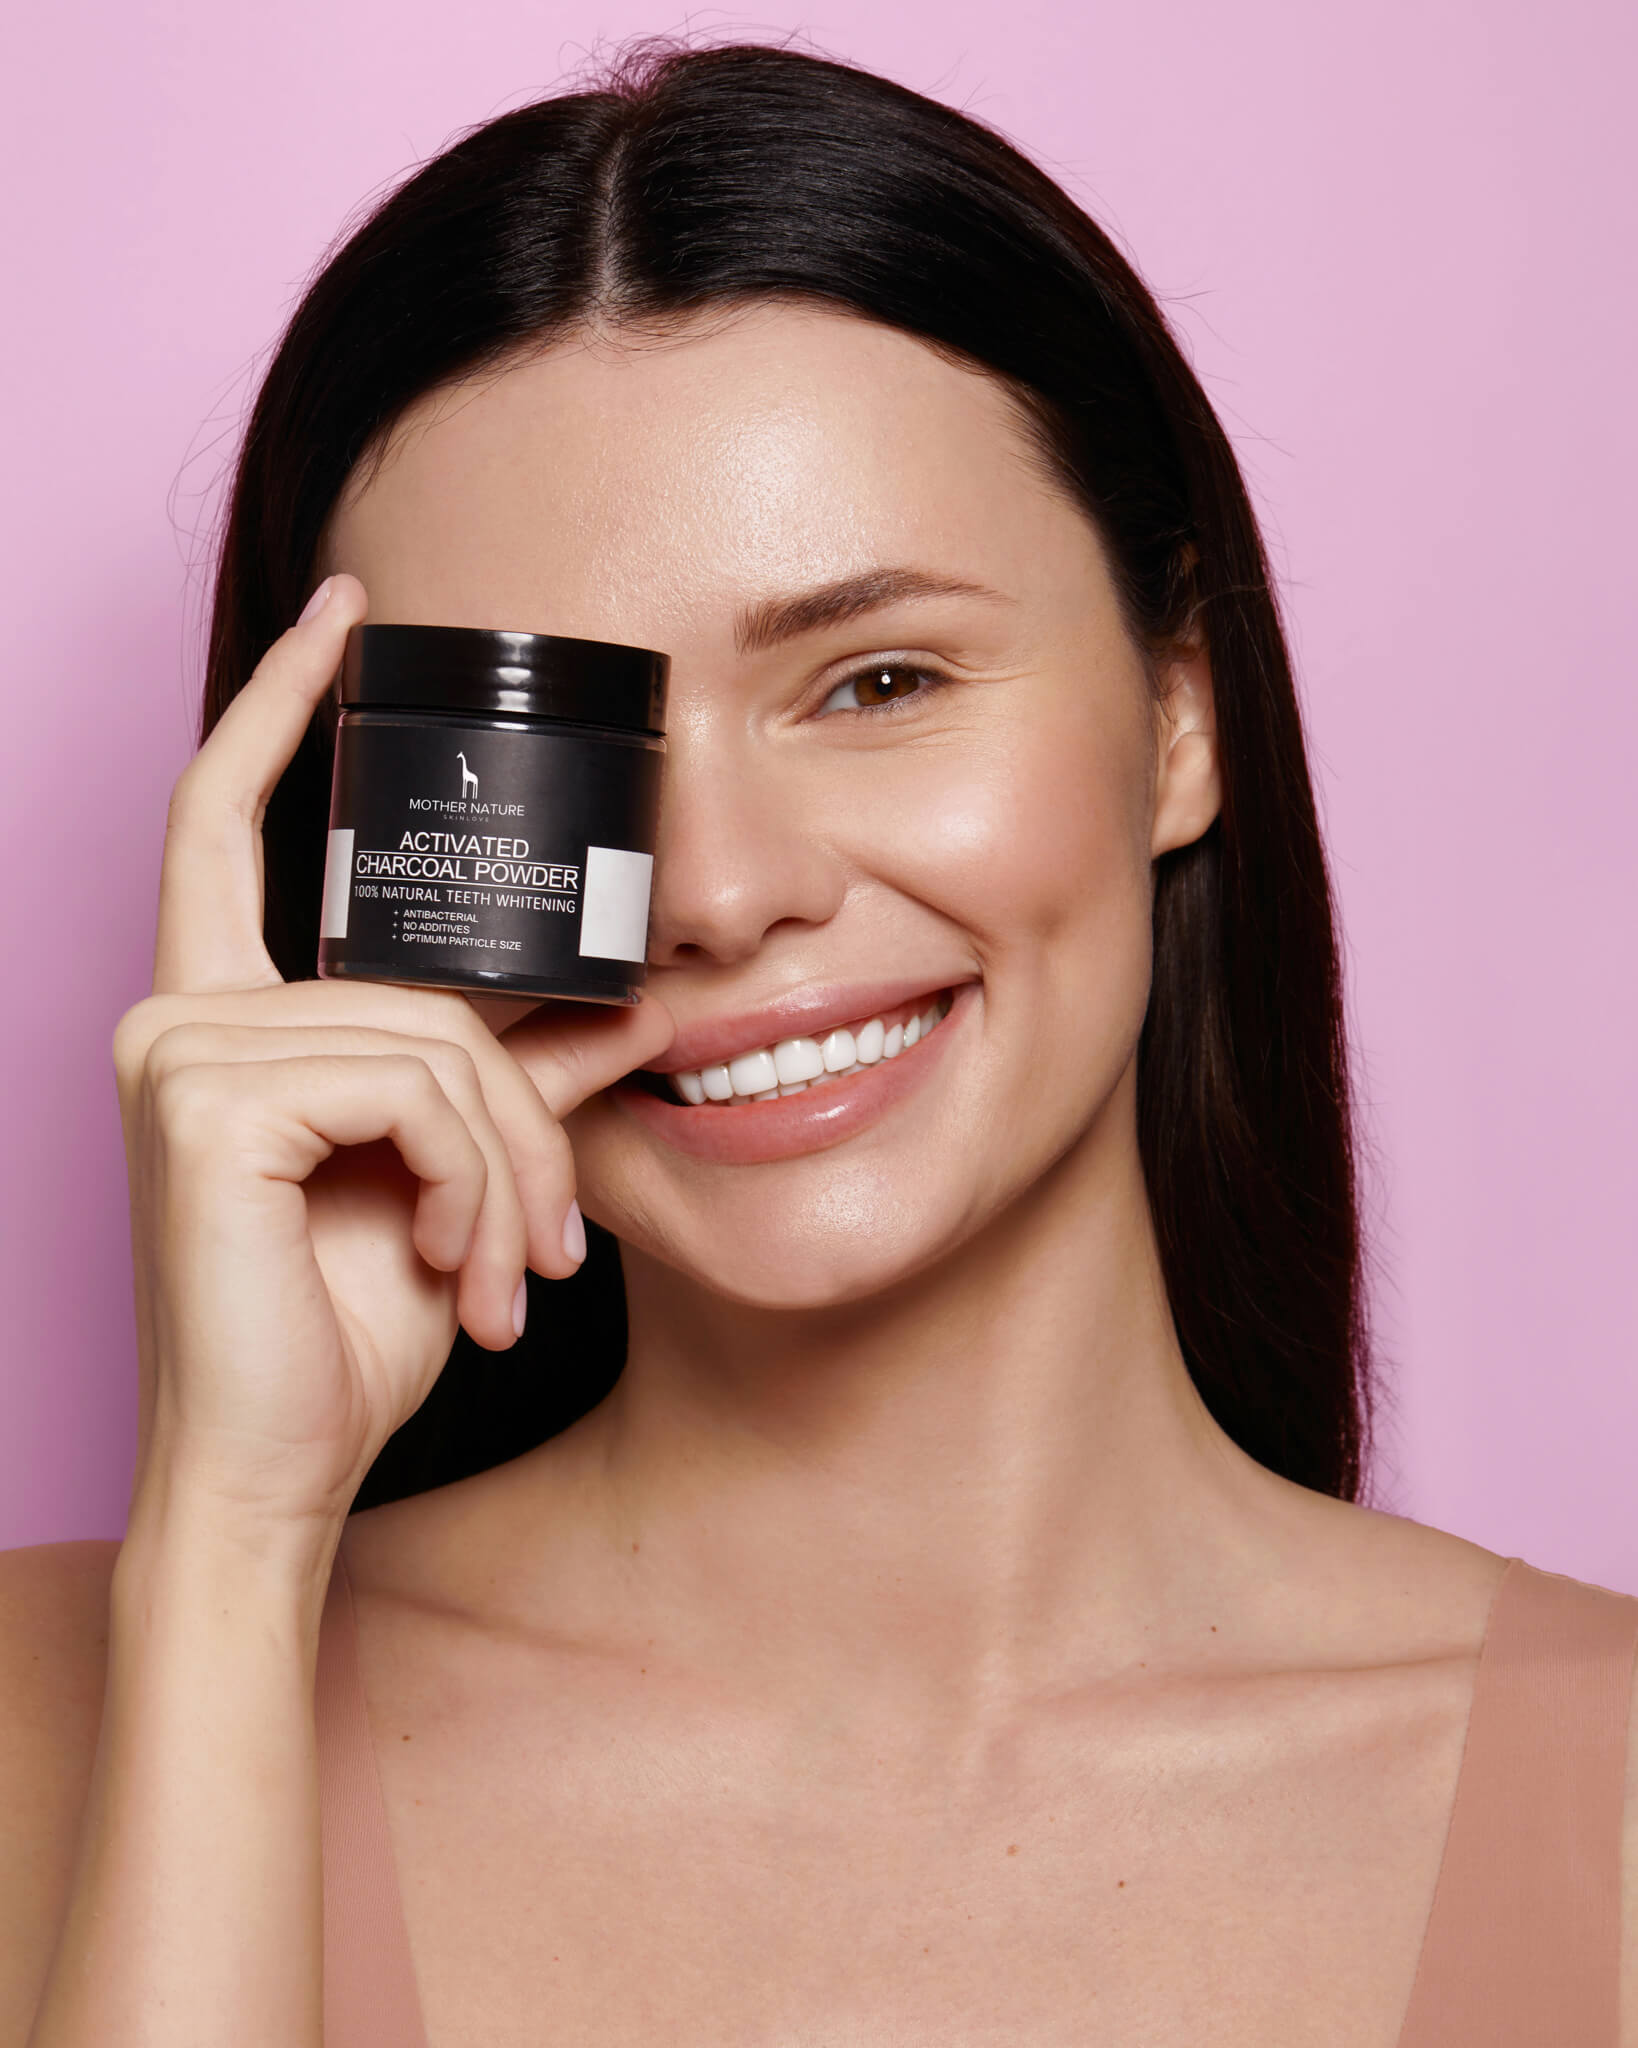 Activated Charcoal Powder for naturally whiter teeth – Mother